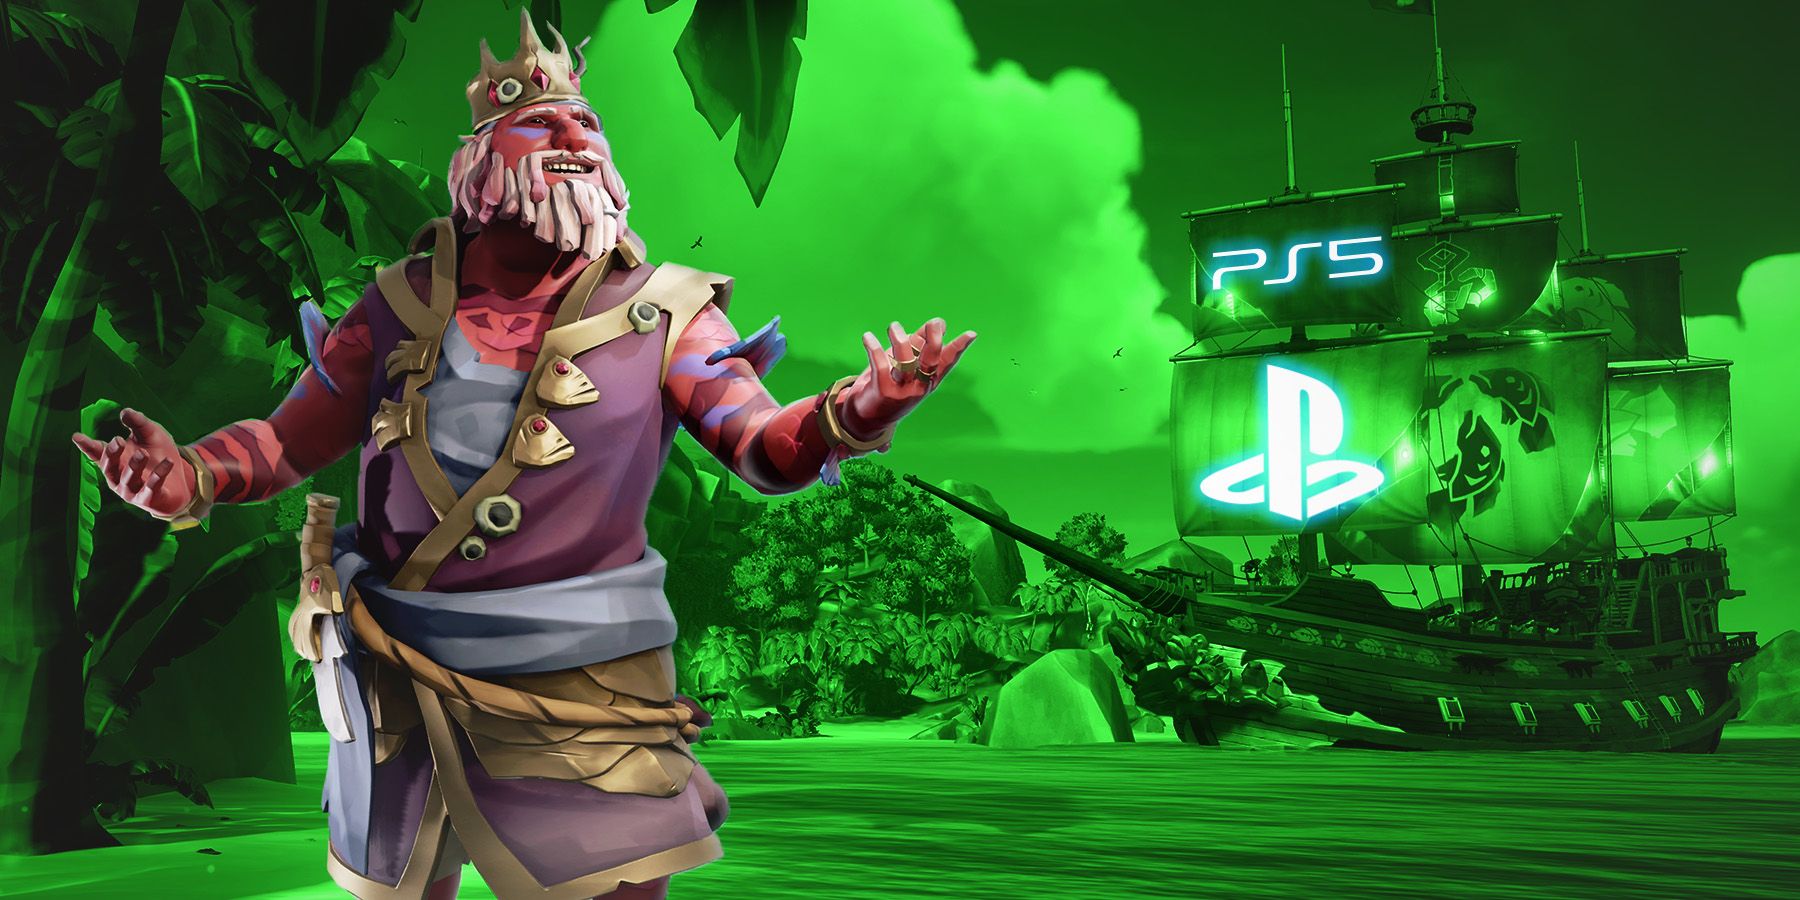 Sea of Thieves character looking happy at boat with PS5 and PlayStation logo emblem flags Xbox green filter background